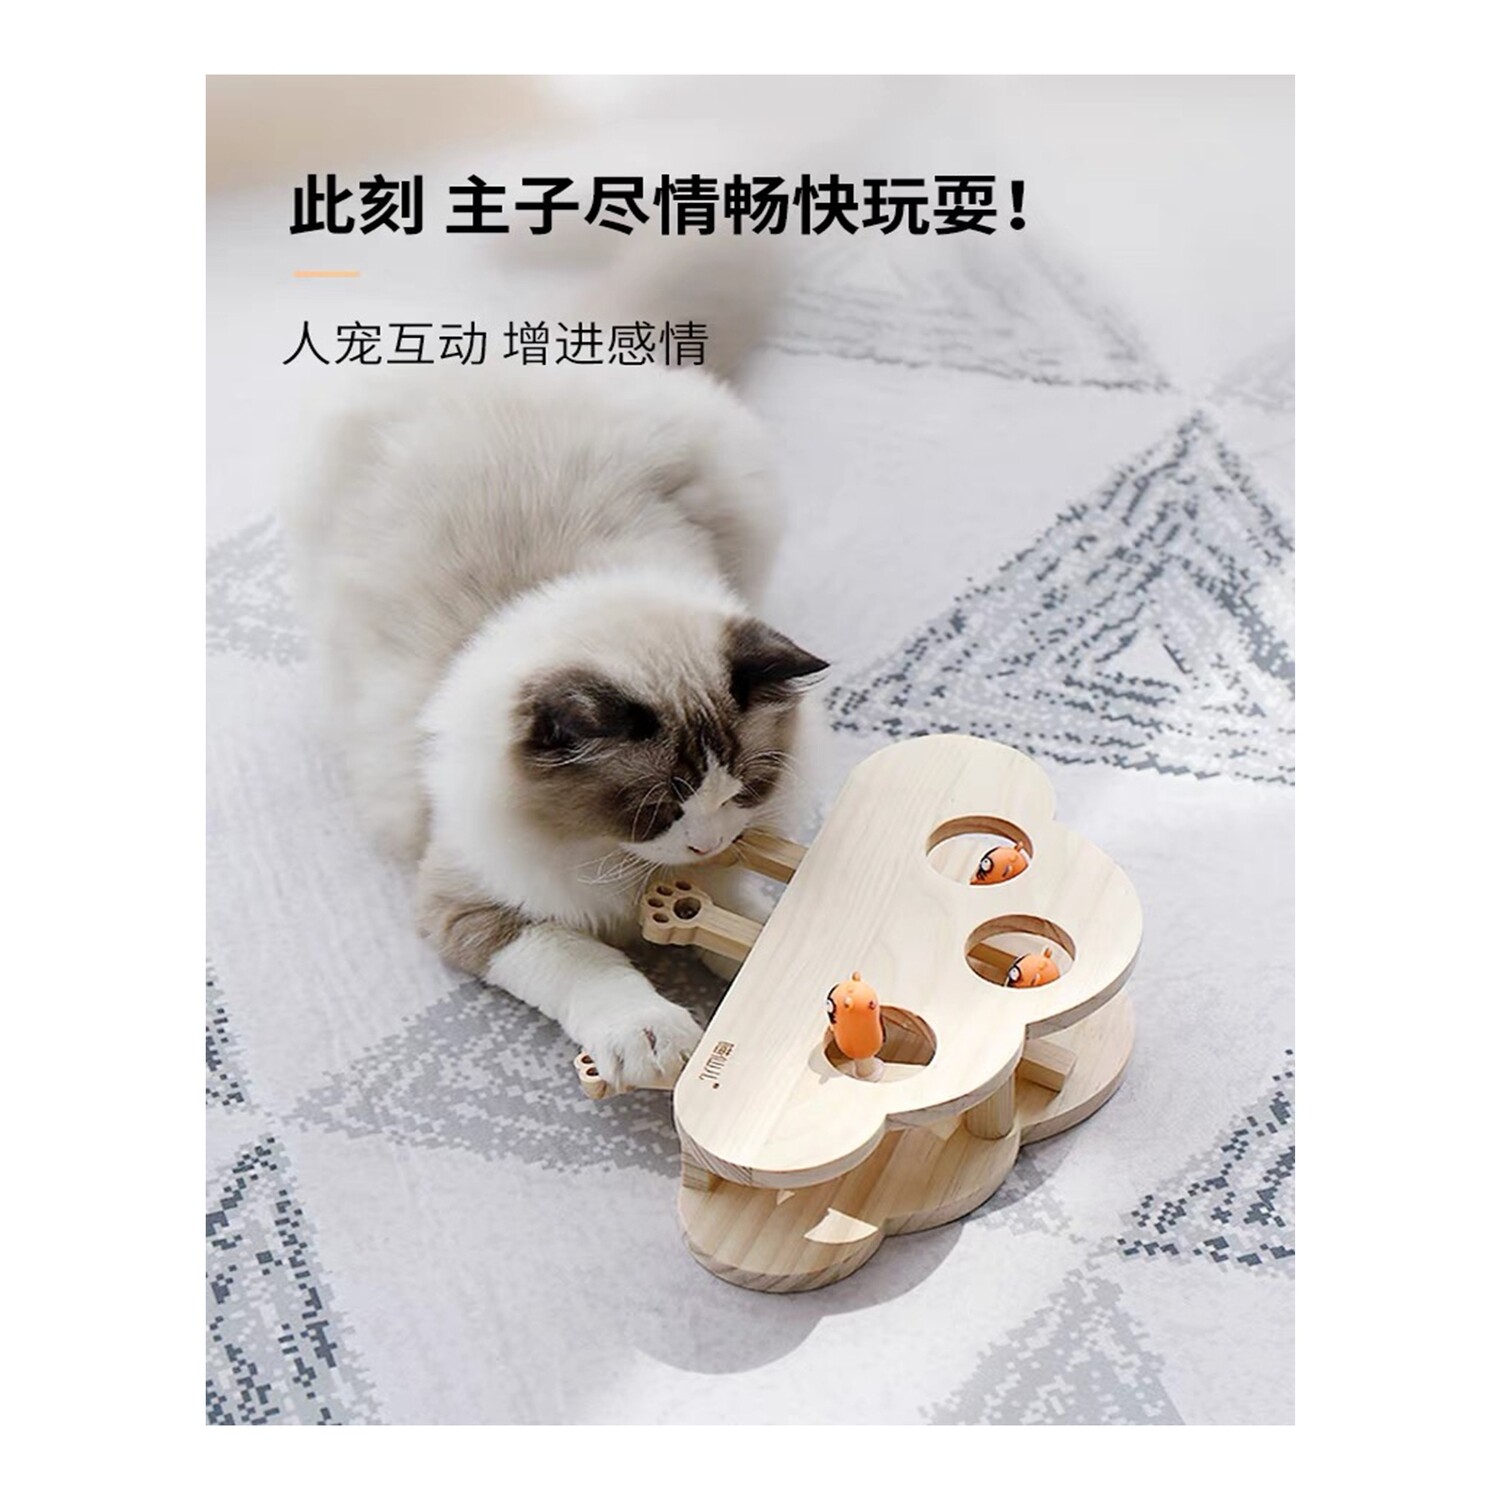 Wood hamster interactive toy